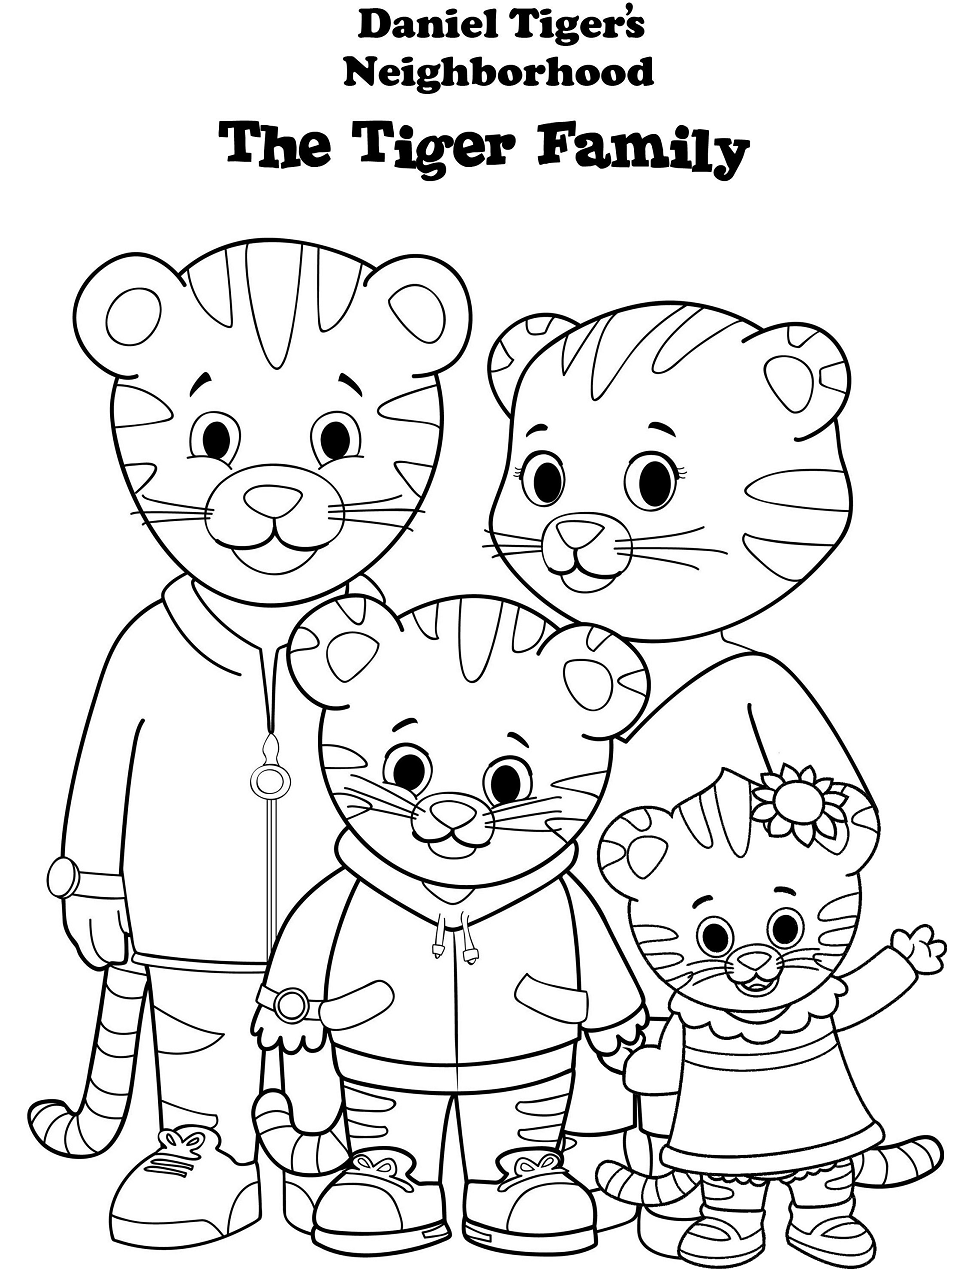 Daniel Tiger Family Coloring Page   Free Printable Coloring Pages ...